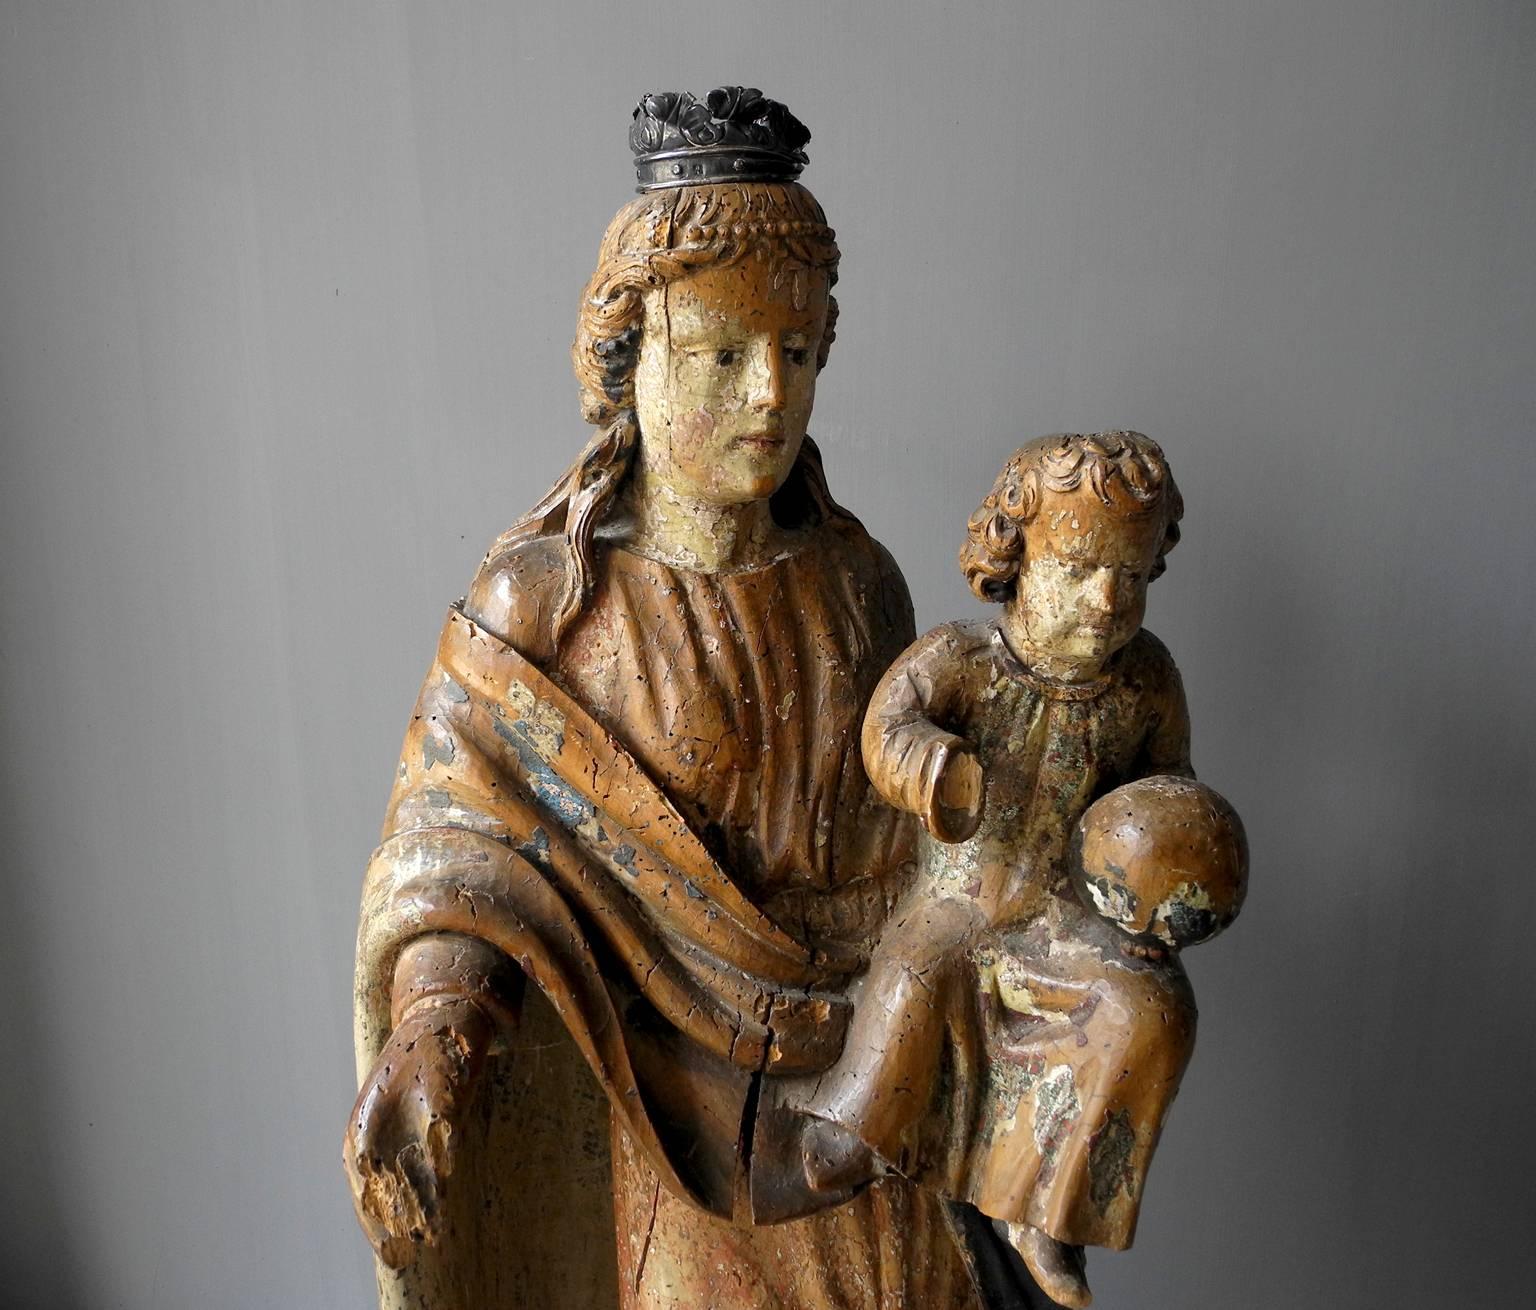 This 17th century painted wooden virgin was found in Italy. It includes its original paint and has somewhat of a patina due to its age. The virgin has a metal crown atop her head and she is holding a baby. It is a perfect size for a historic antique